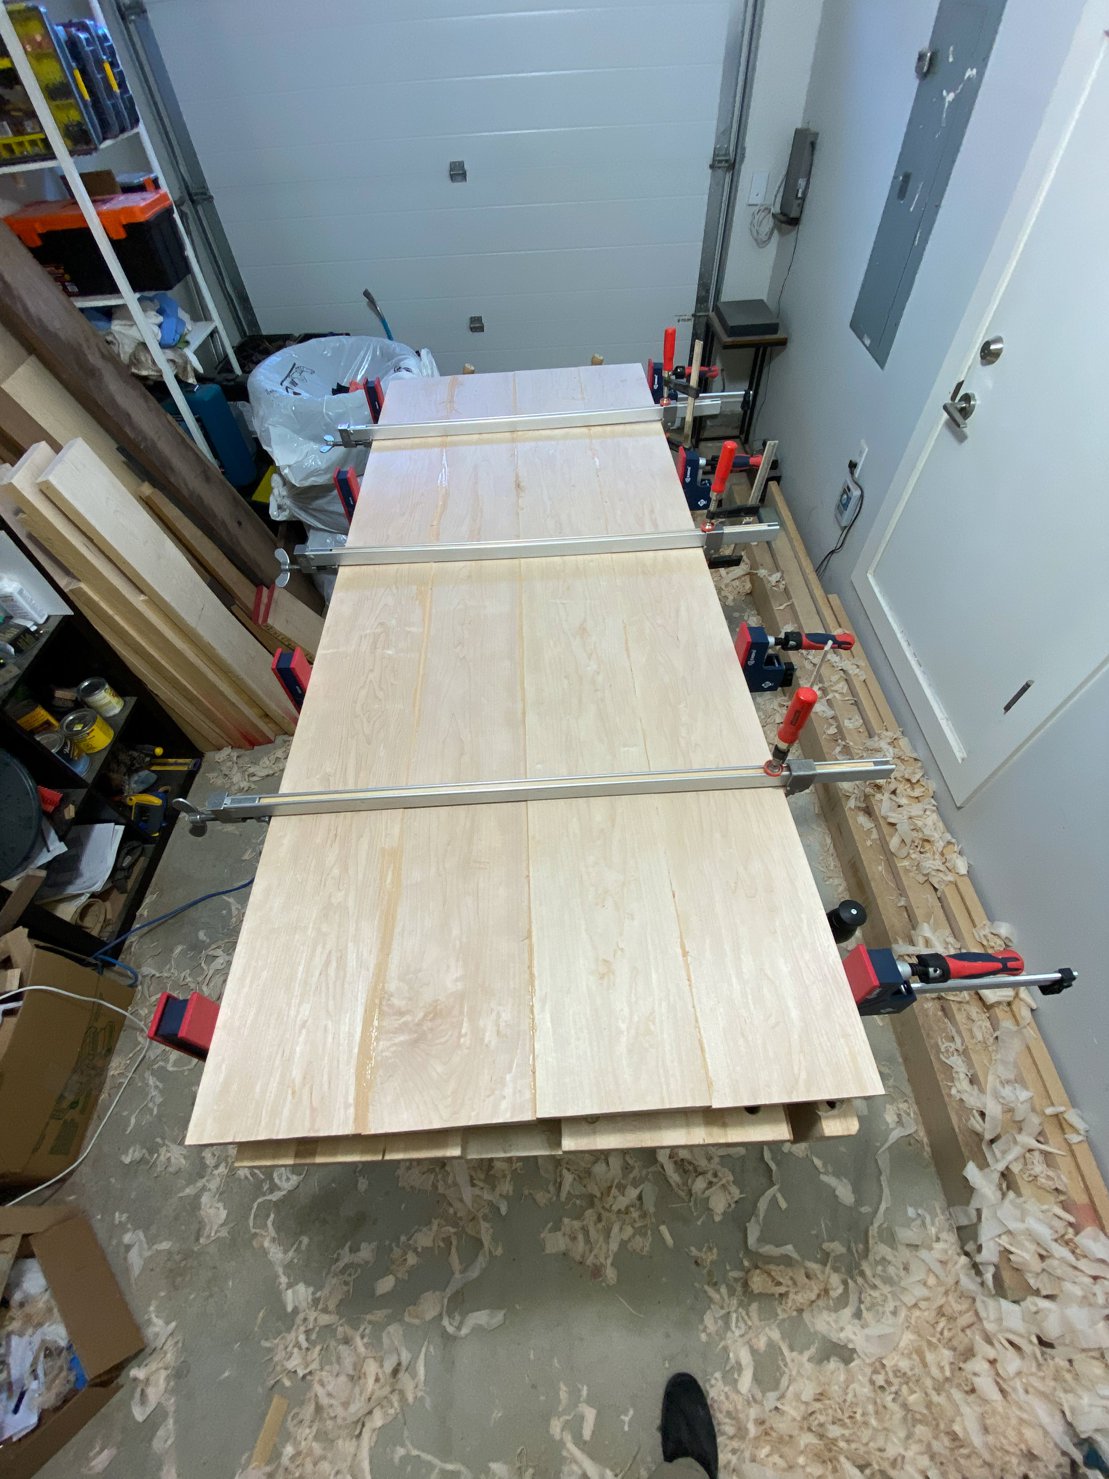 Table top being glued up